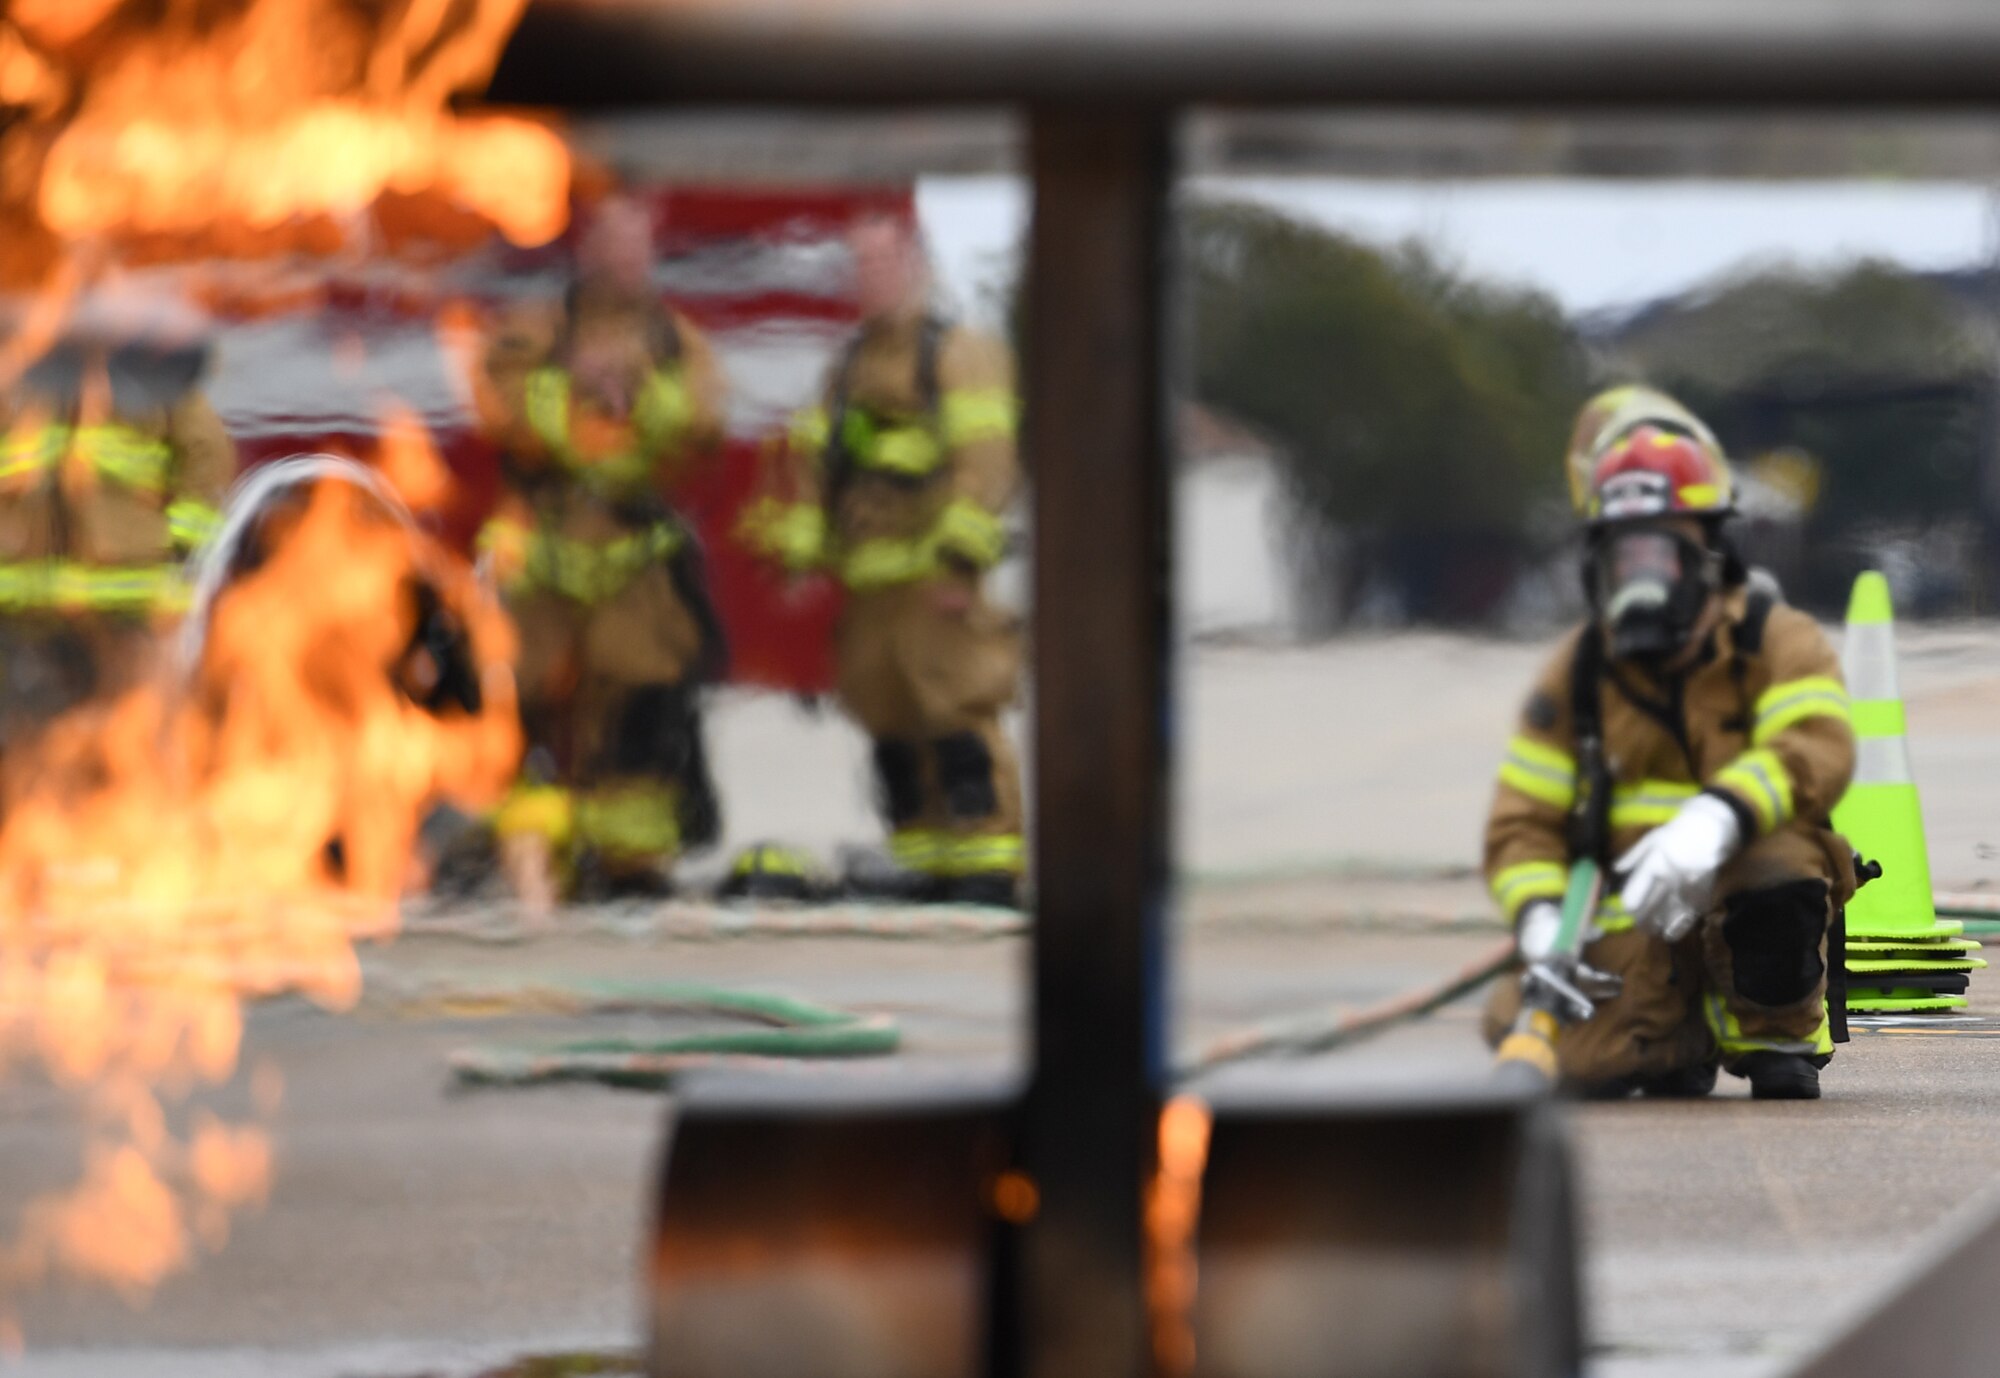 Keesler firefighters use a hand-held hose to extinguish a fire on a mock C-123 training device during an aircraft rescue fire fighting training exercise at Keesler Air Force Base, Mississippi, Nov. 8, 2019. The five-day joint agency training allowed the Keesler Fire Department and the Gulfport Combat Readiness Training Center Fire Department to meet the semi-annual training requirement to practice aircraft rescue and live fire training evolutions. (U.S. Air Force photo by Kemberly Groue)